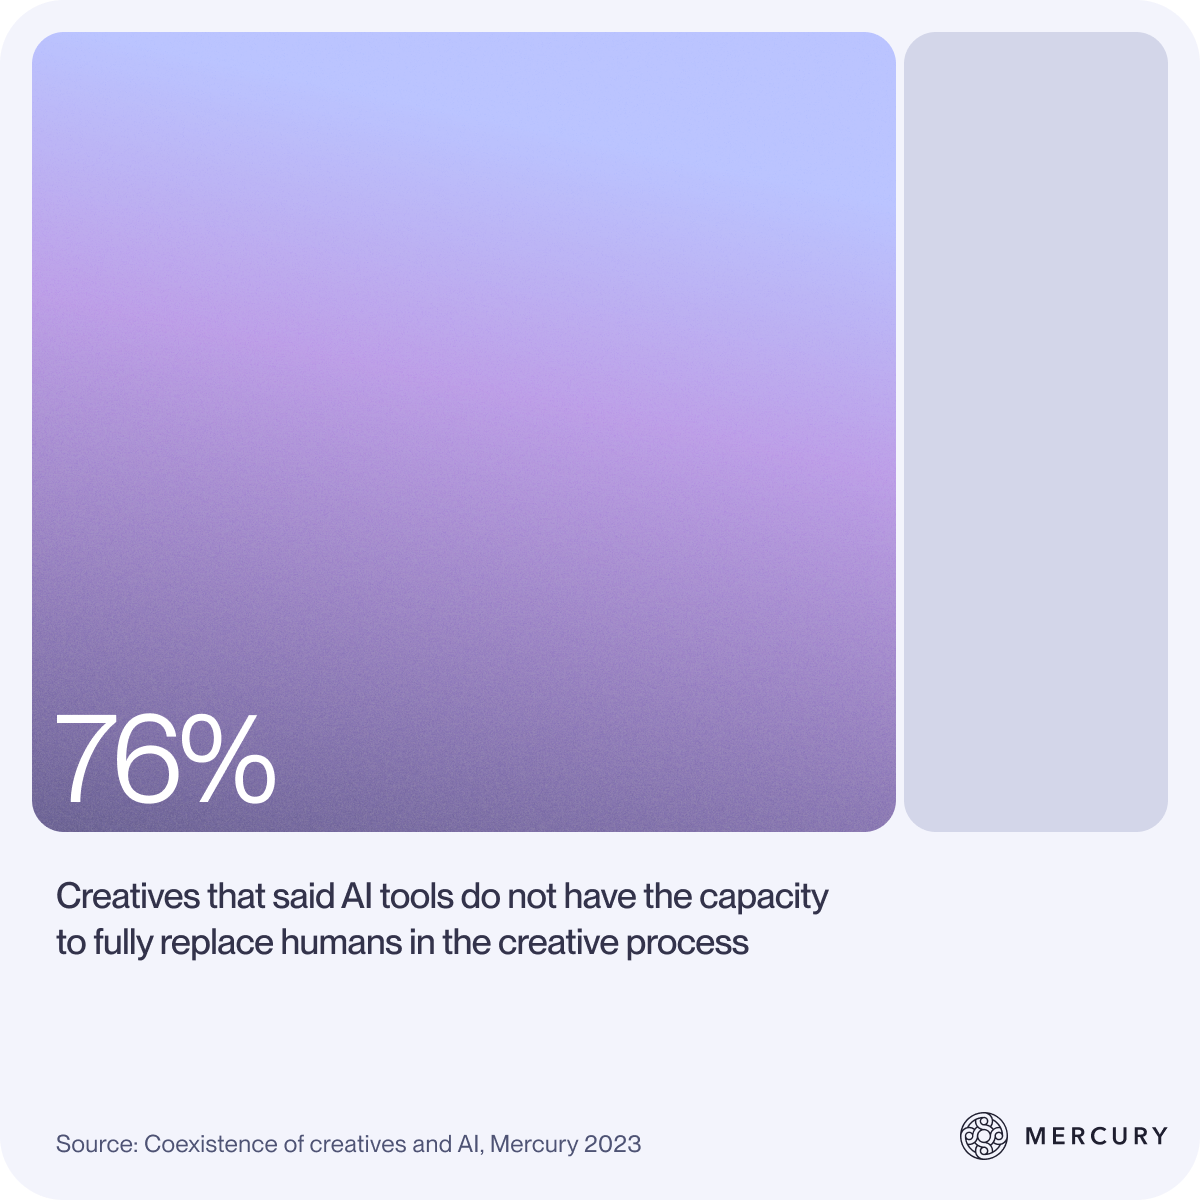 Graphic showing that 76% of creatives don't believe AI tools have the capacity to replace humans in the creative process